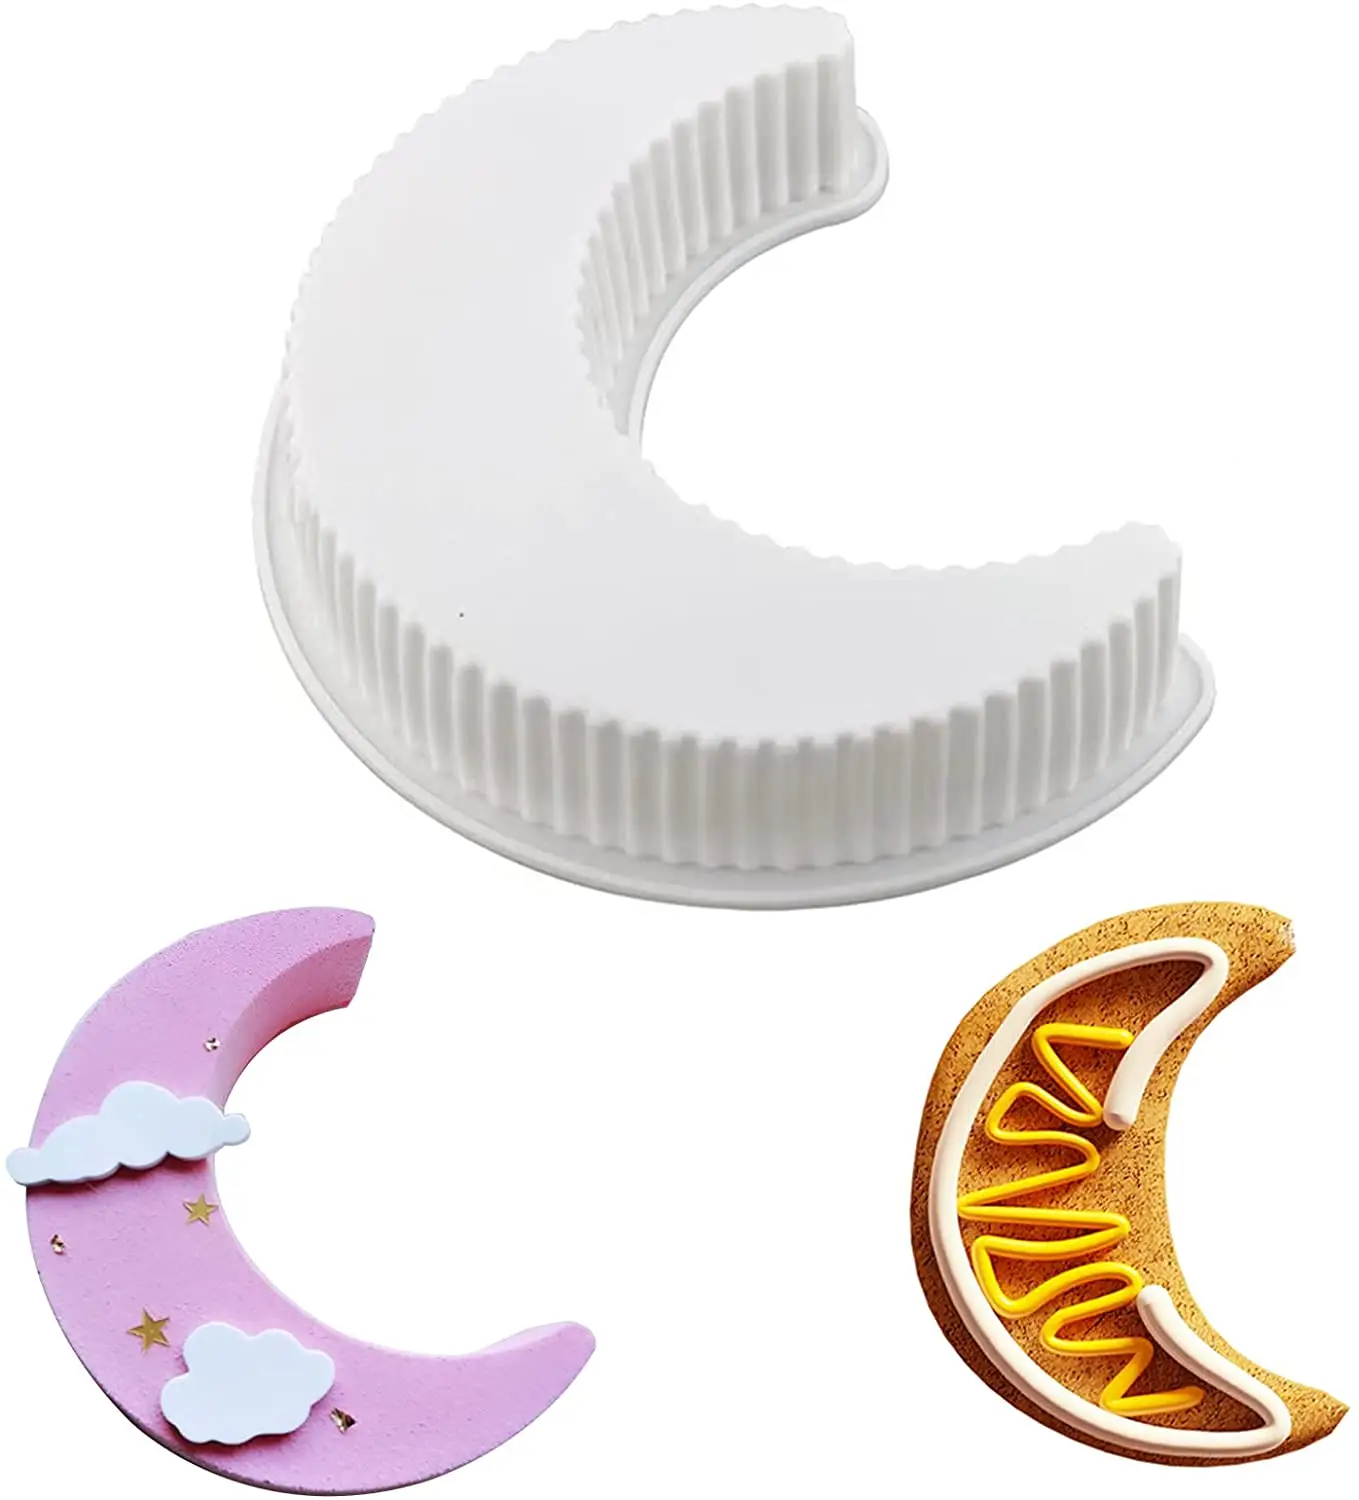 YDS Big Size 3D Moon Silicone Cake Mold DIY Crescent Mousse Cake Pan Candy Cake Pizza Baking Model Bakeware Tool